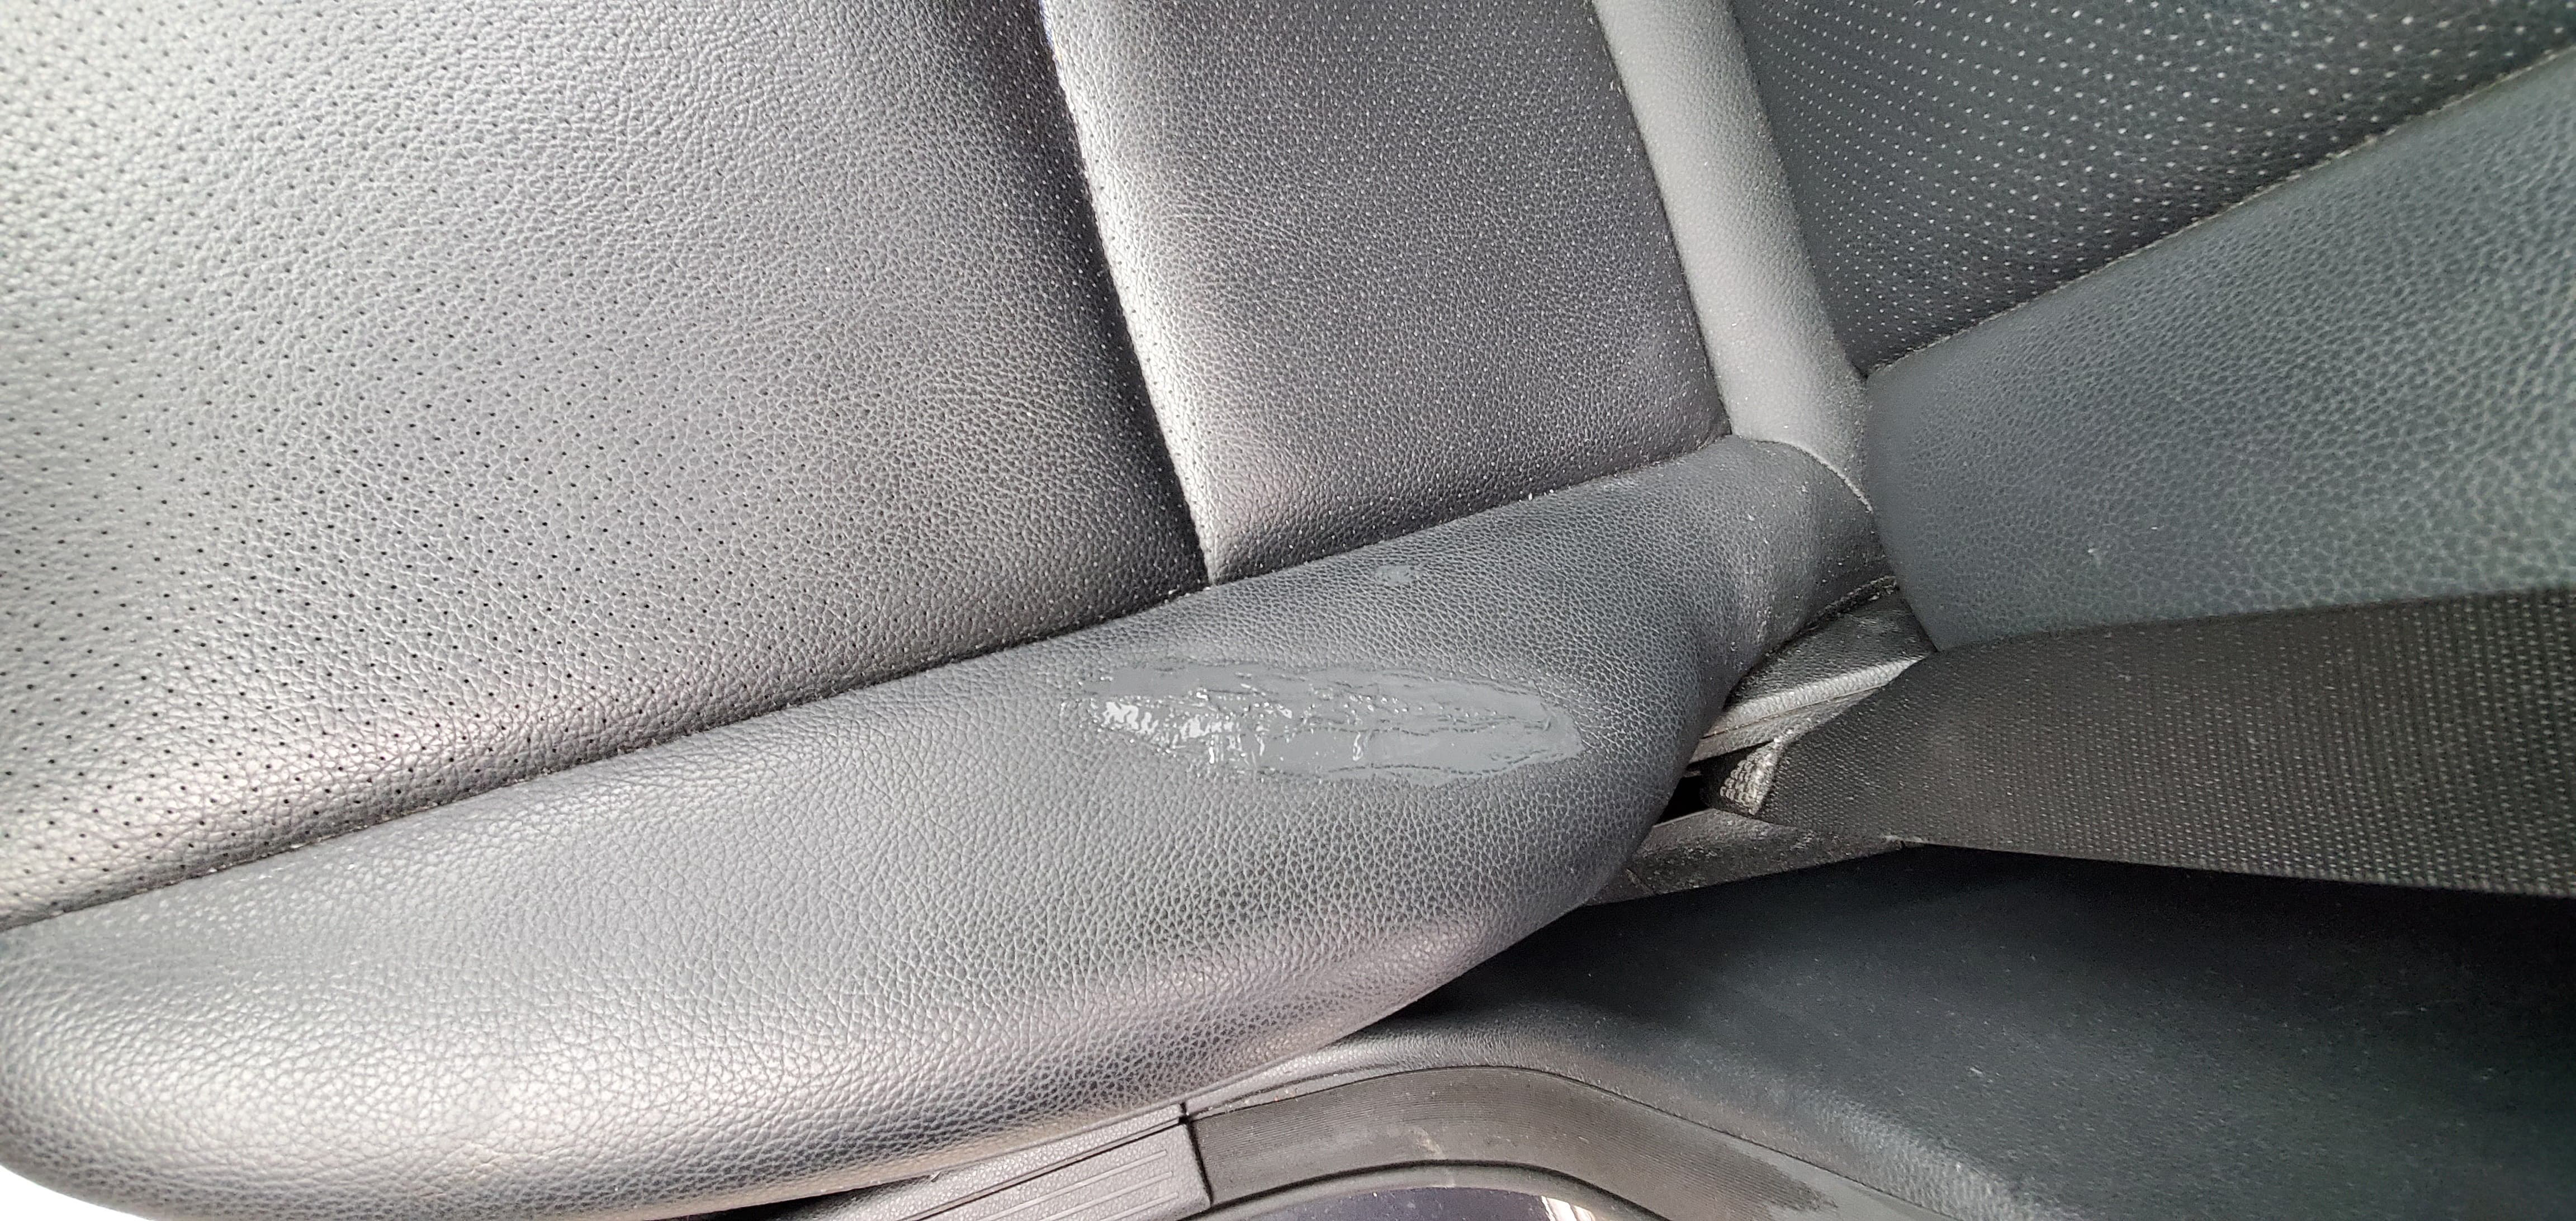 How To Repair A Leather Car Seat - How To Repair Small Tear In Leather Seat